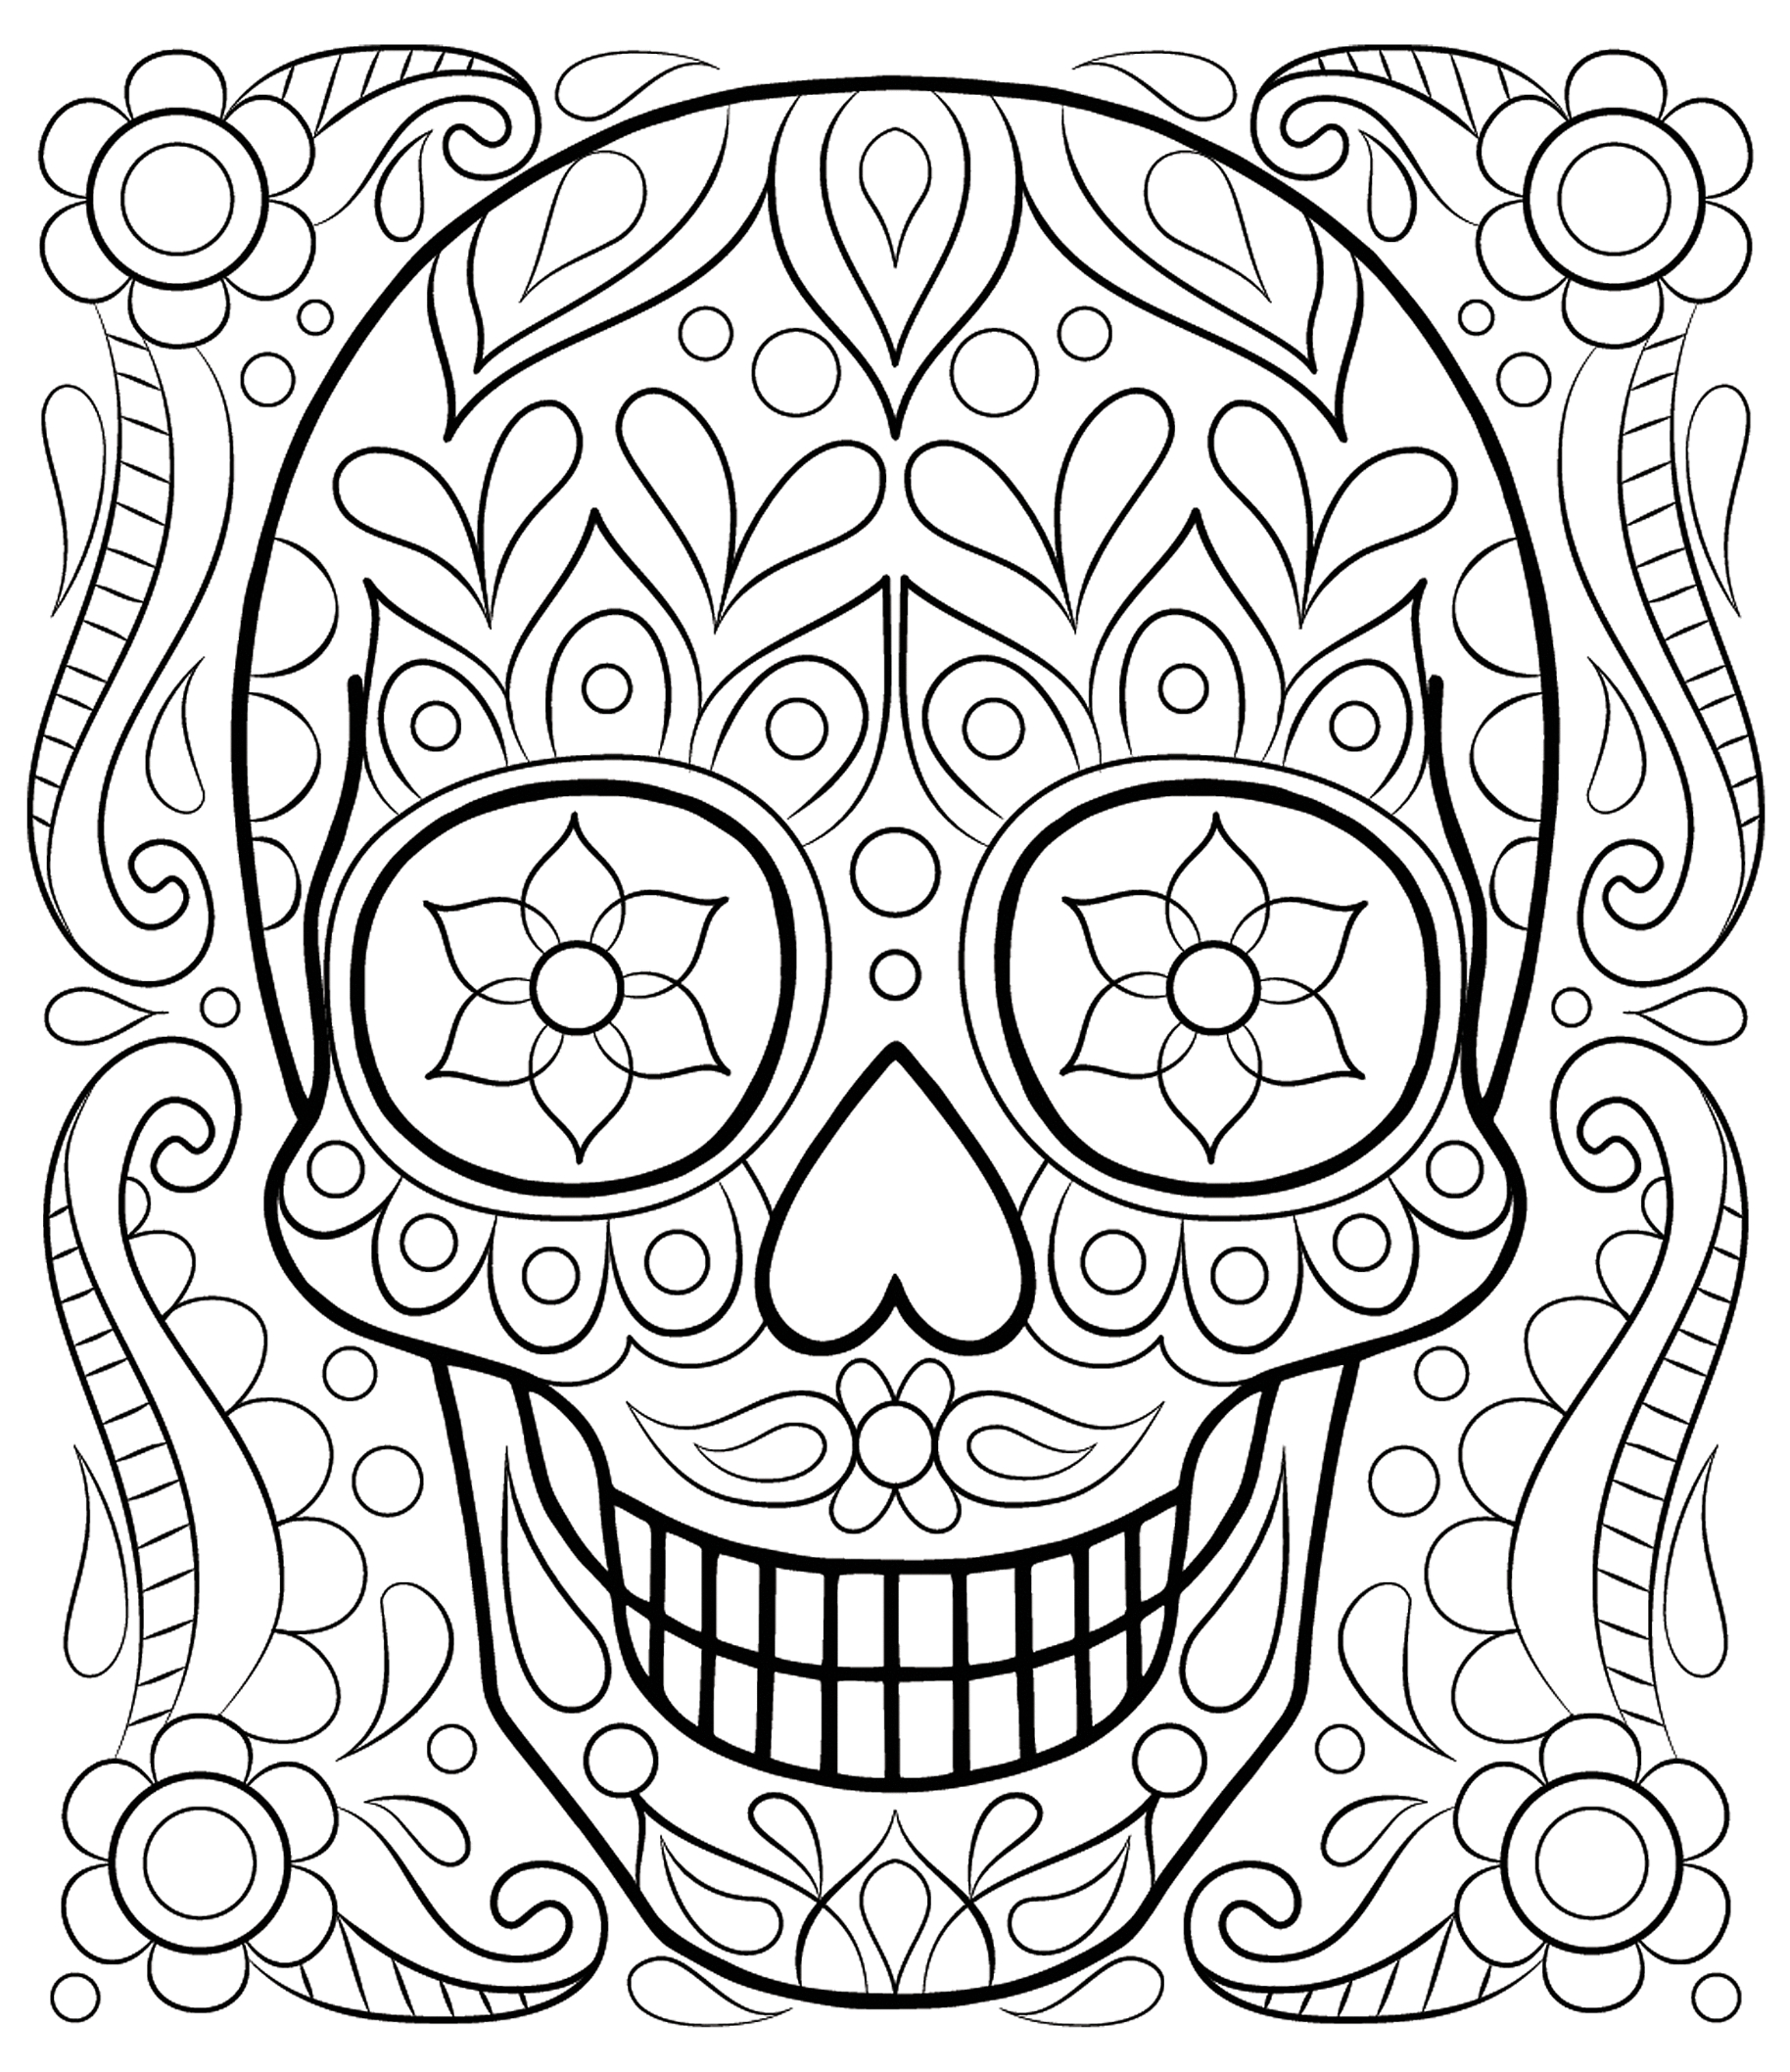 Coloring Ideas  Fabulous Coloring Worksheets For Adults Image Ideas